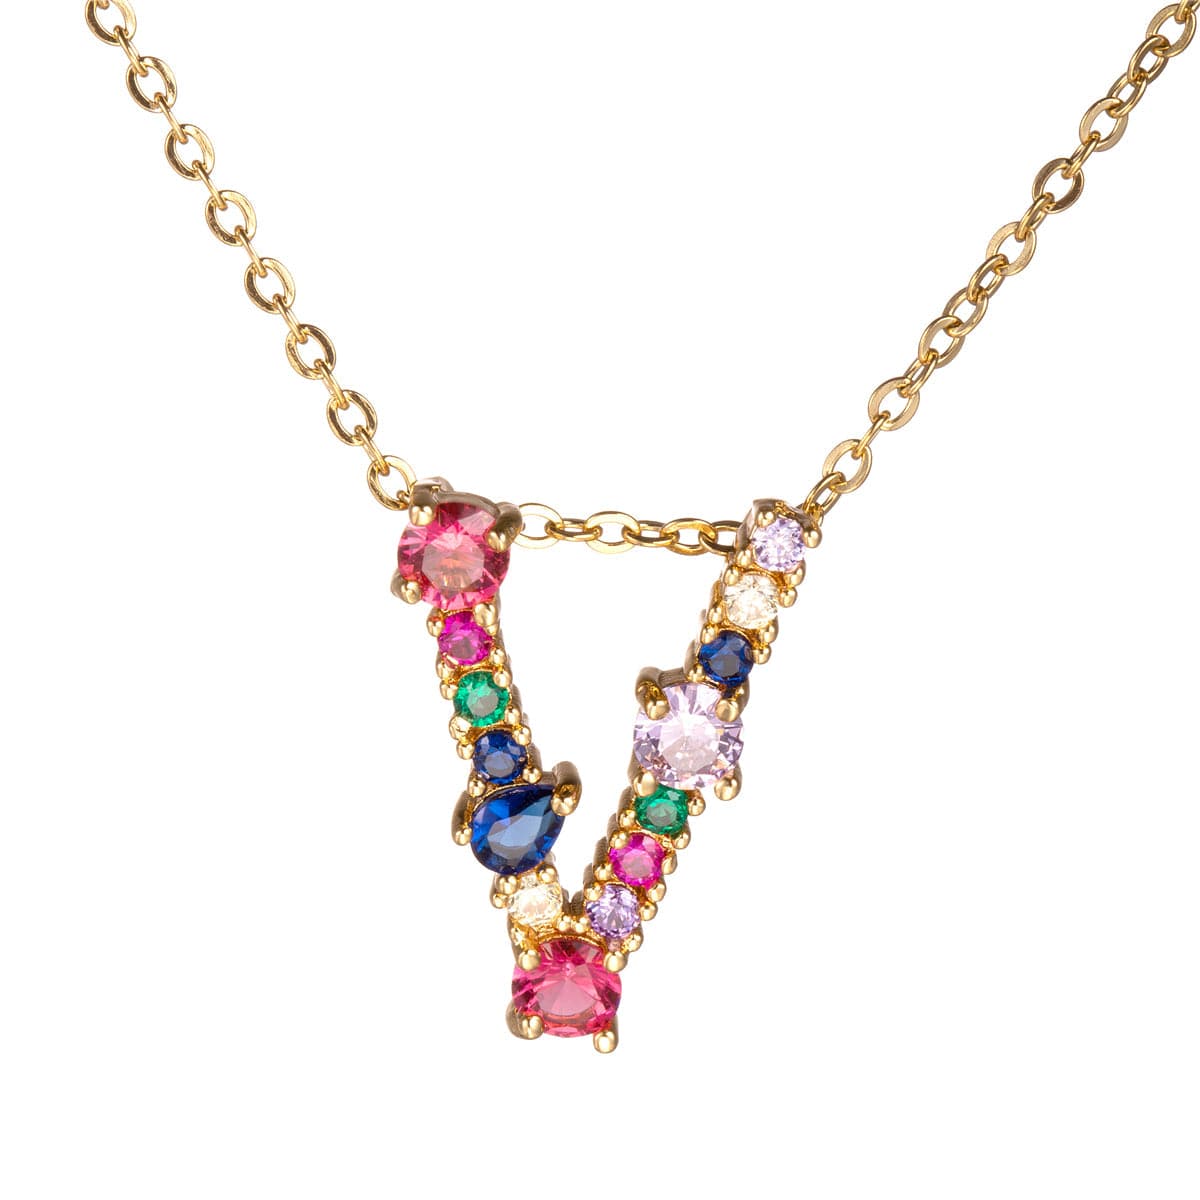 Red Multicolor Crystal & Cubic Zirconia Letter V Pendant Necklace